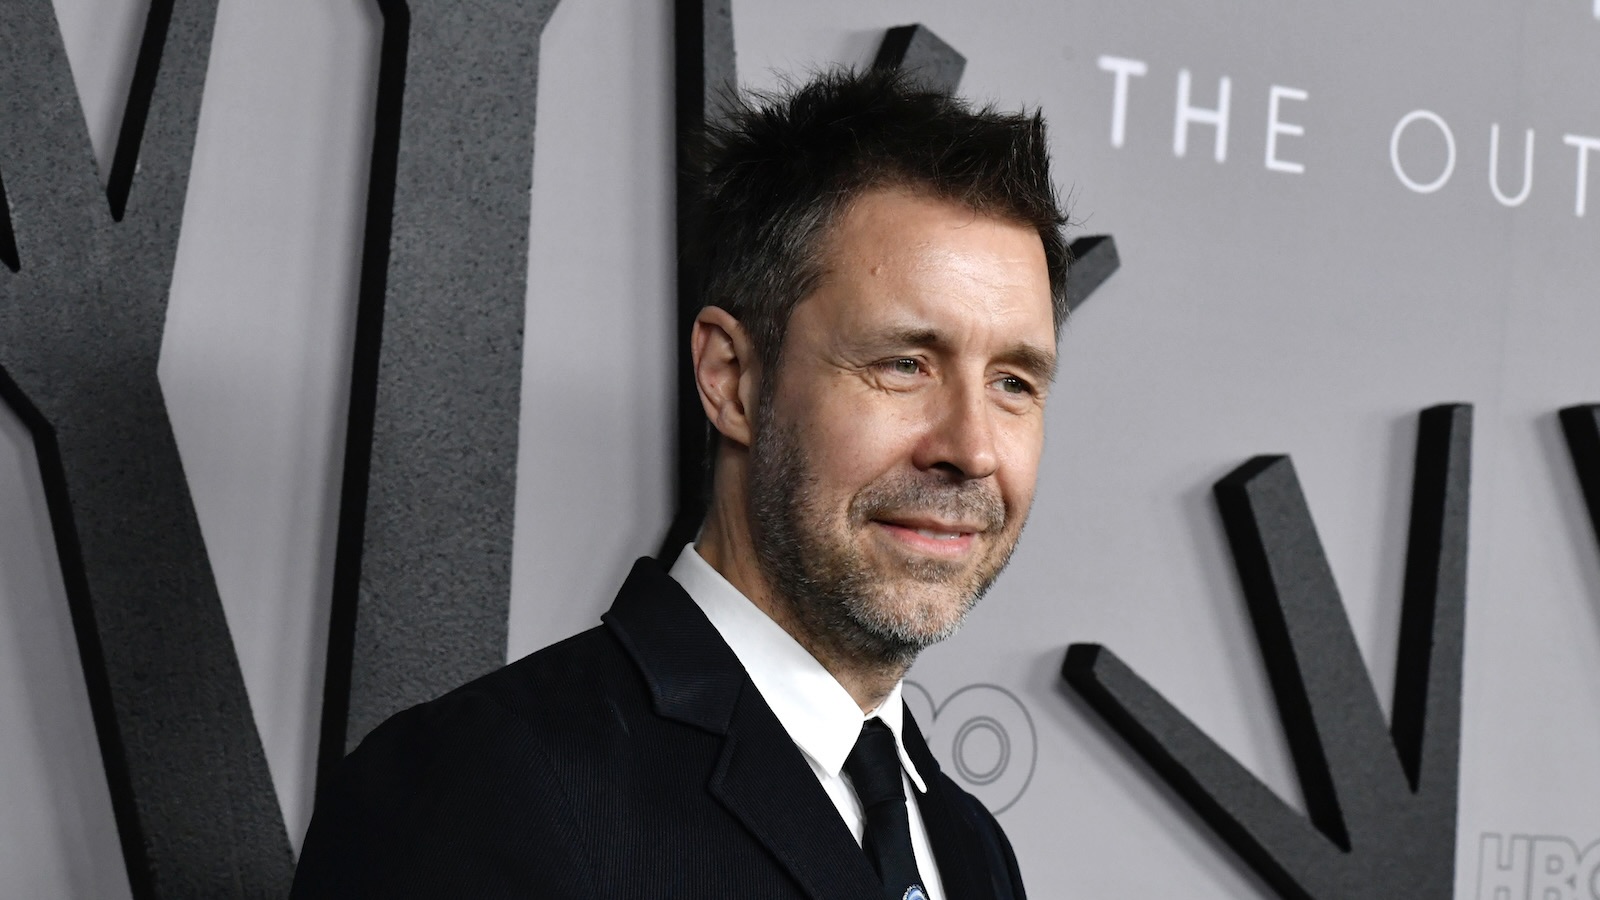 Paddy Considine attends the Premiere Of HBO's "The Outsider" at DGA Theater on January 09, 2020 in Los Angeles, California.